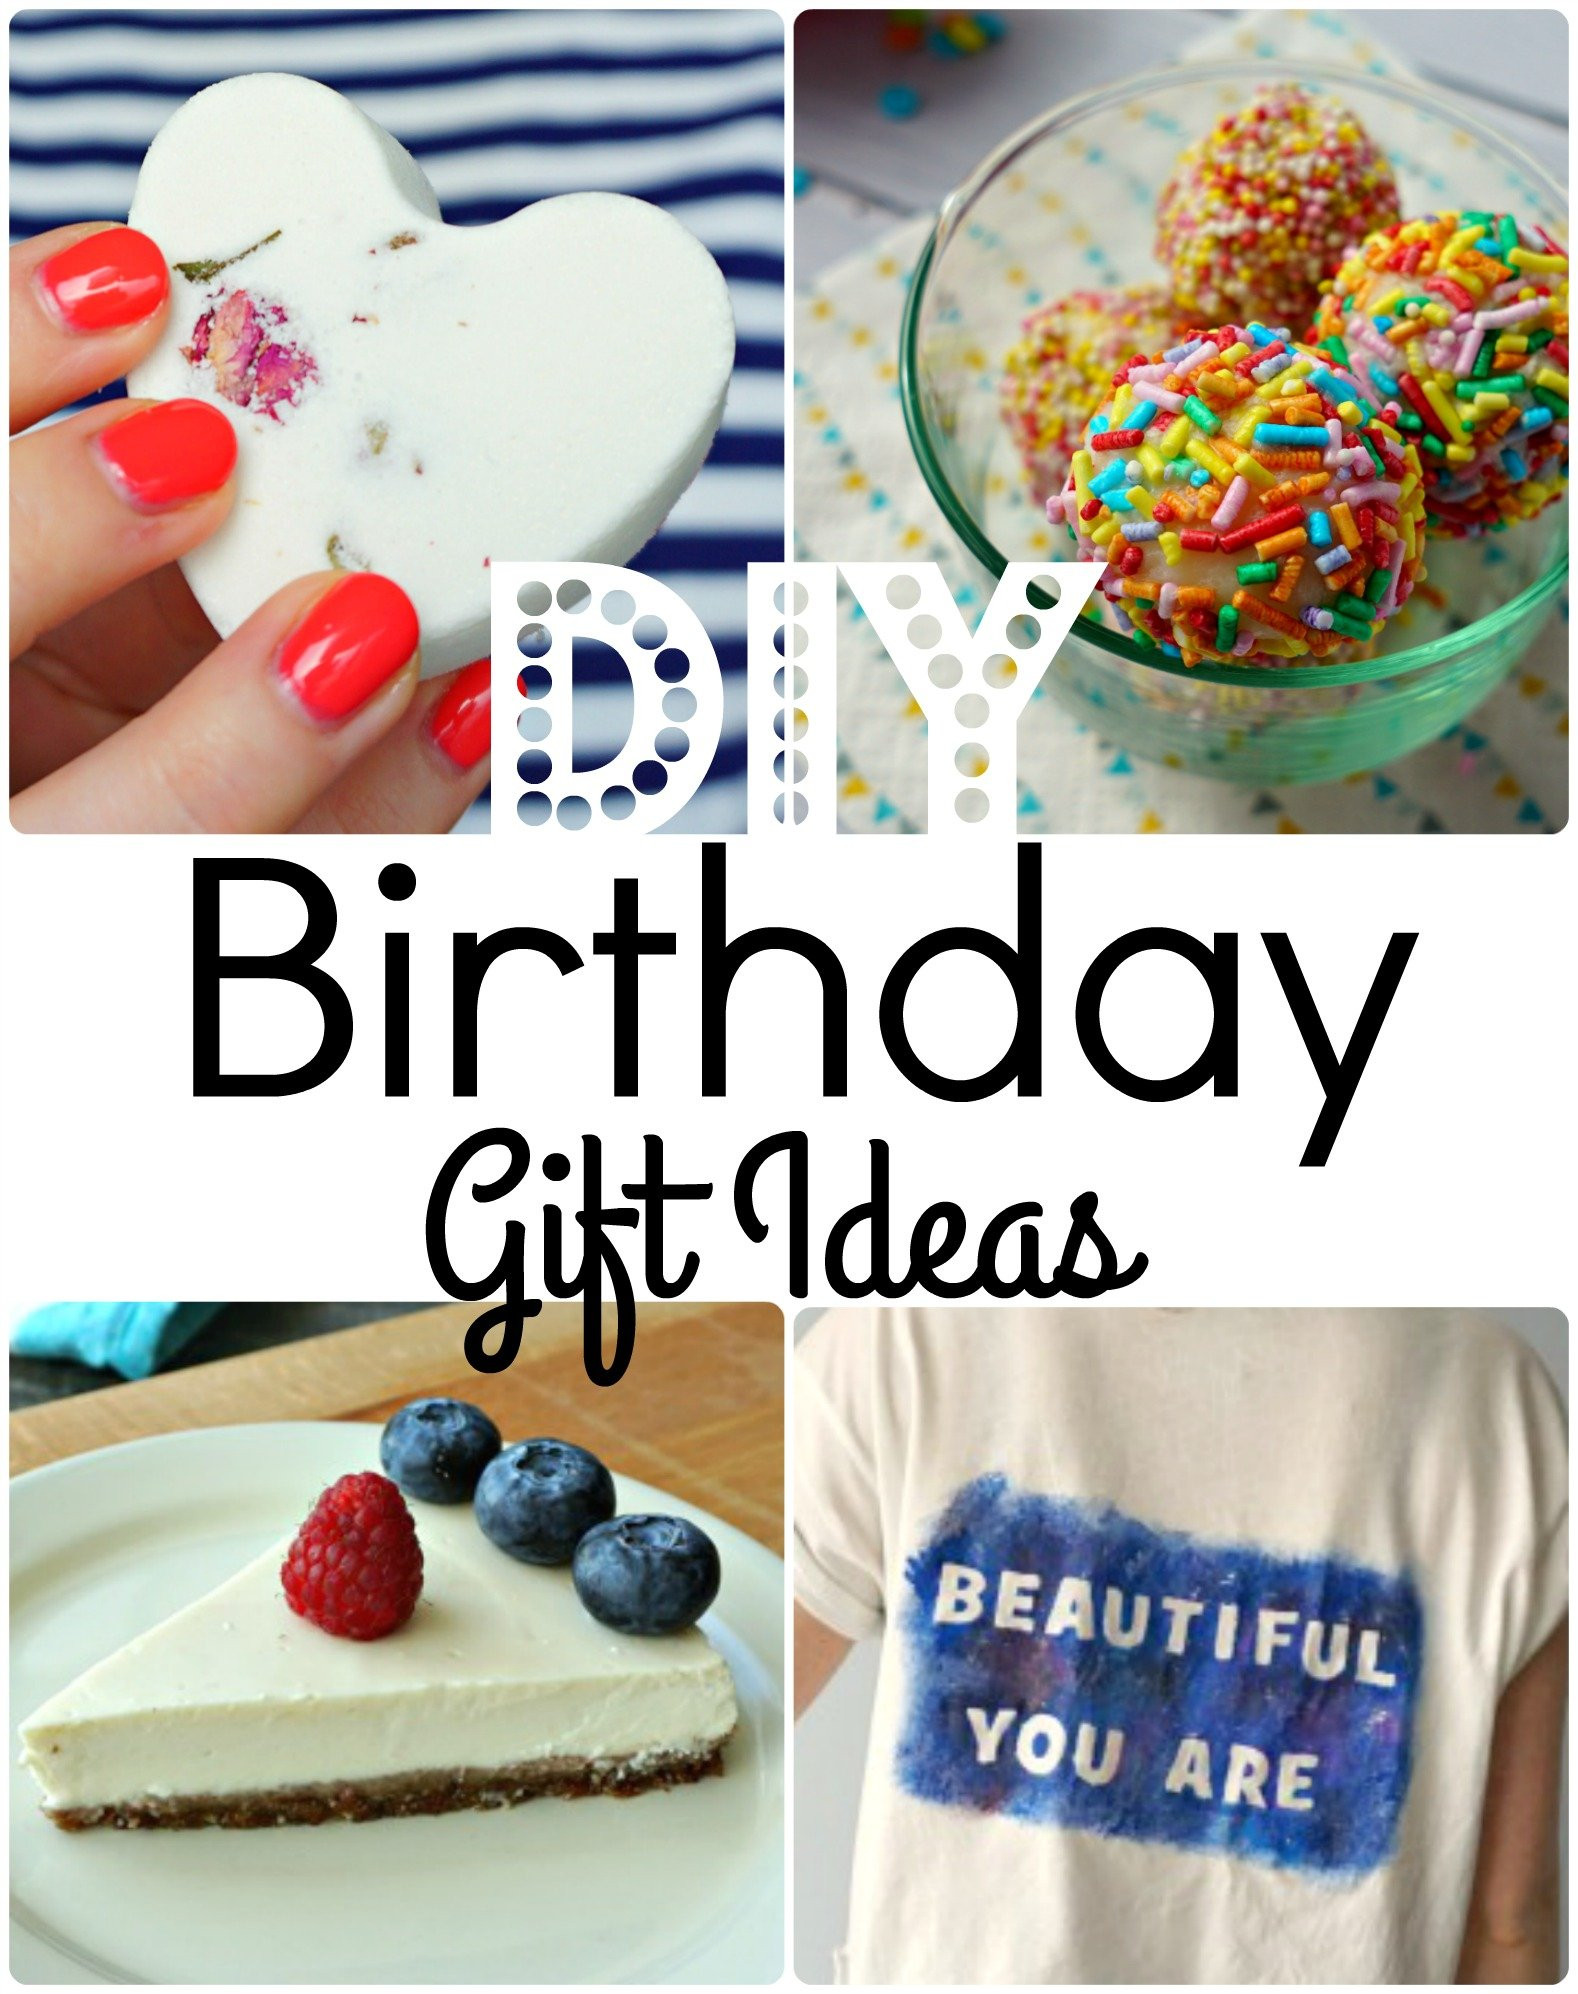 Birthday Gifts Diy
 7 Easy DIY Birthday Gift Ideas that are always a hit The